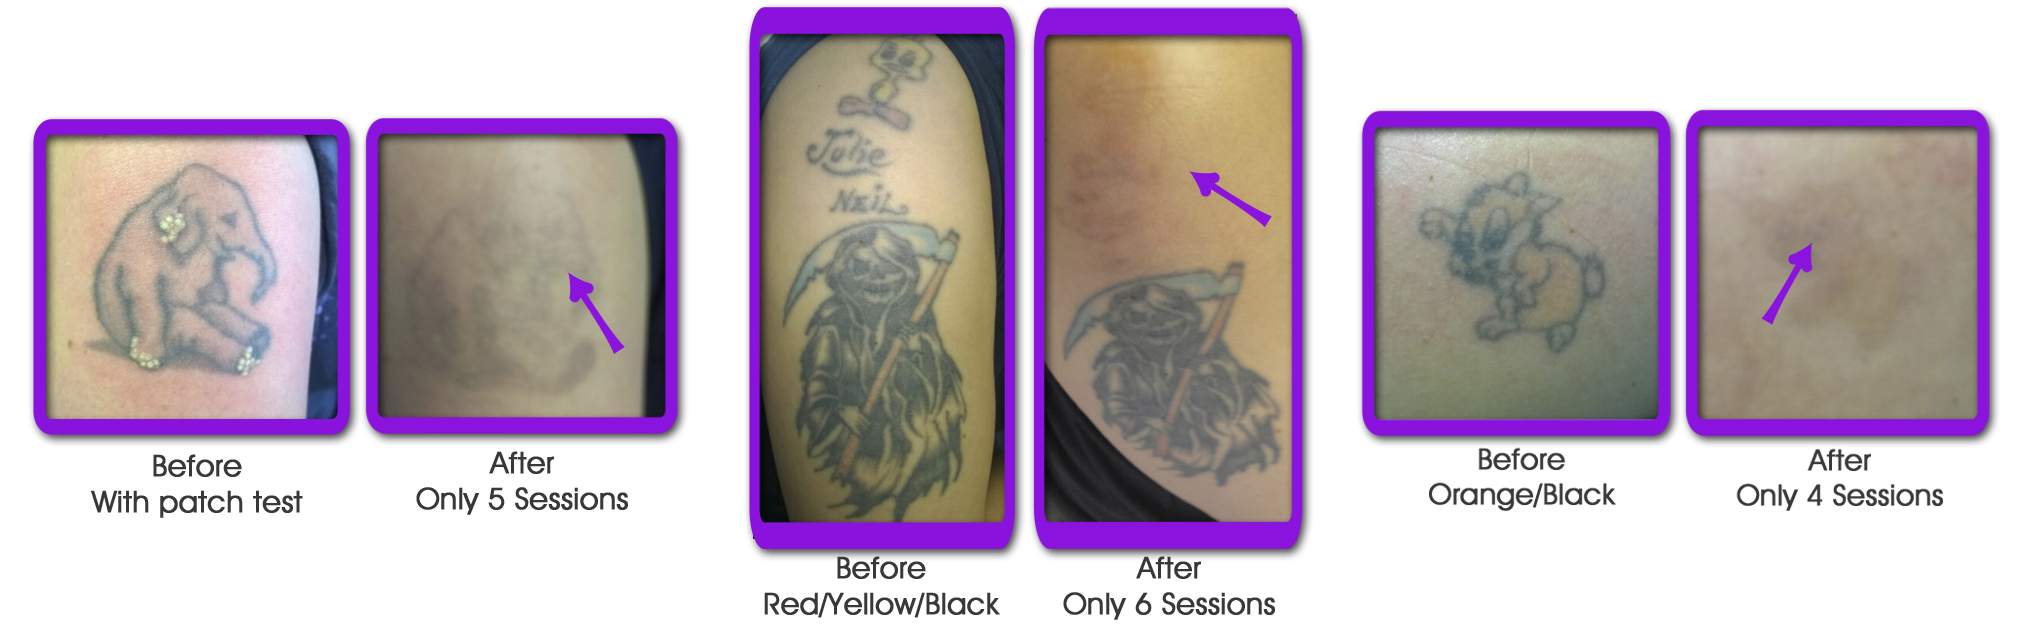 Top Rejuvi Tattoo Removal Images for Pinterest Tattoos